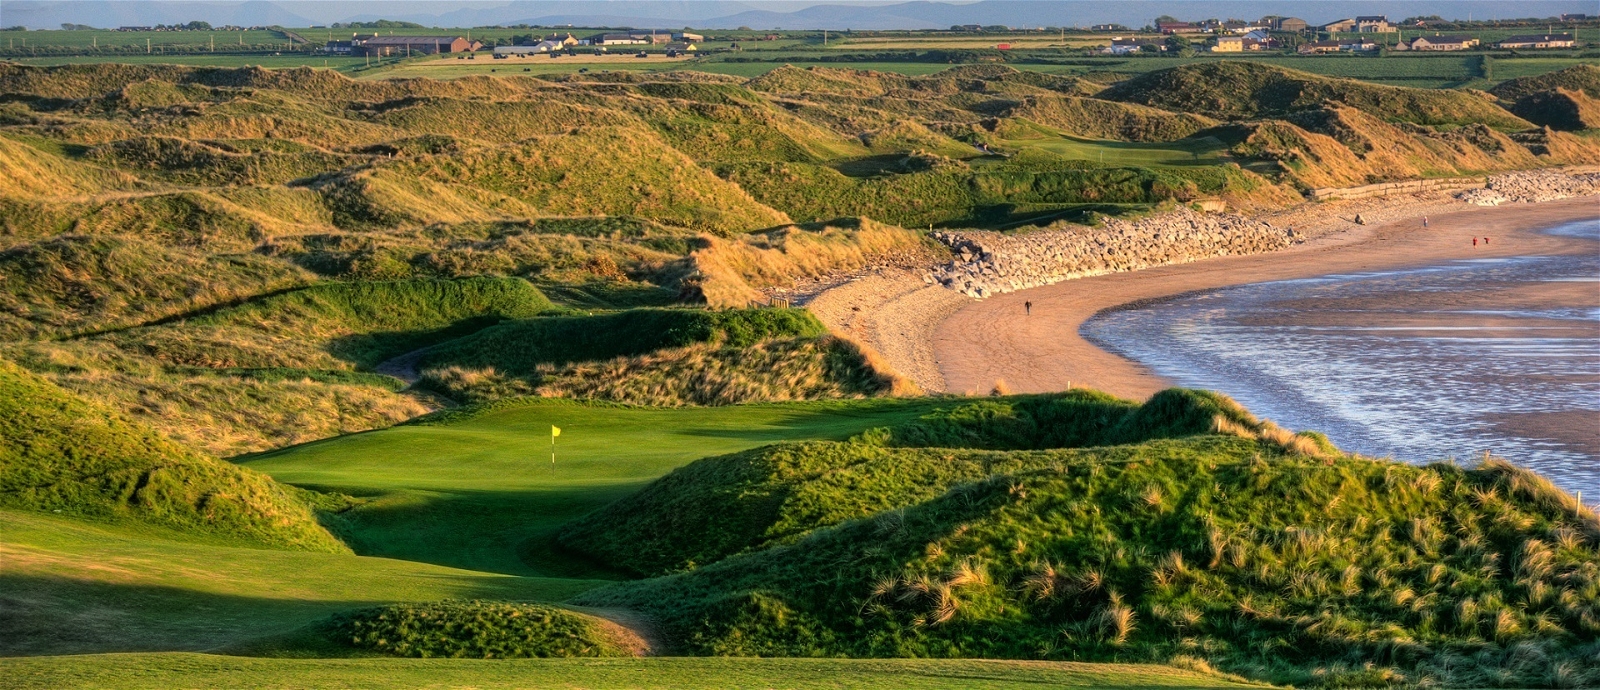 Golf Vacation Package - Ballybunion Golf Club - The Old Course